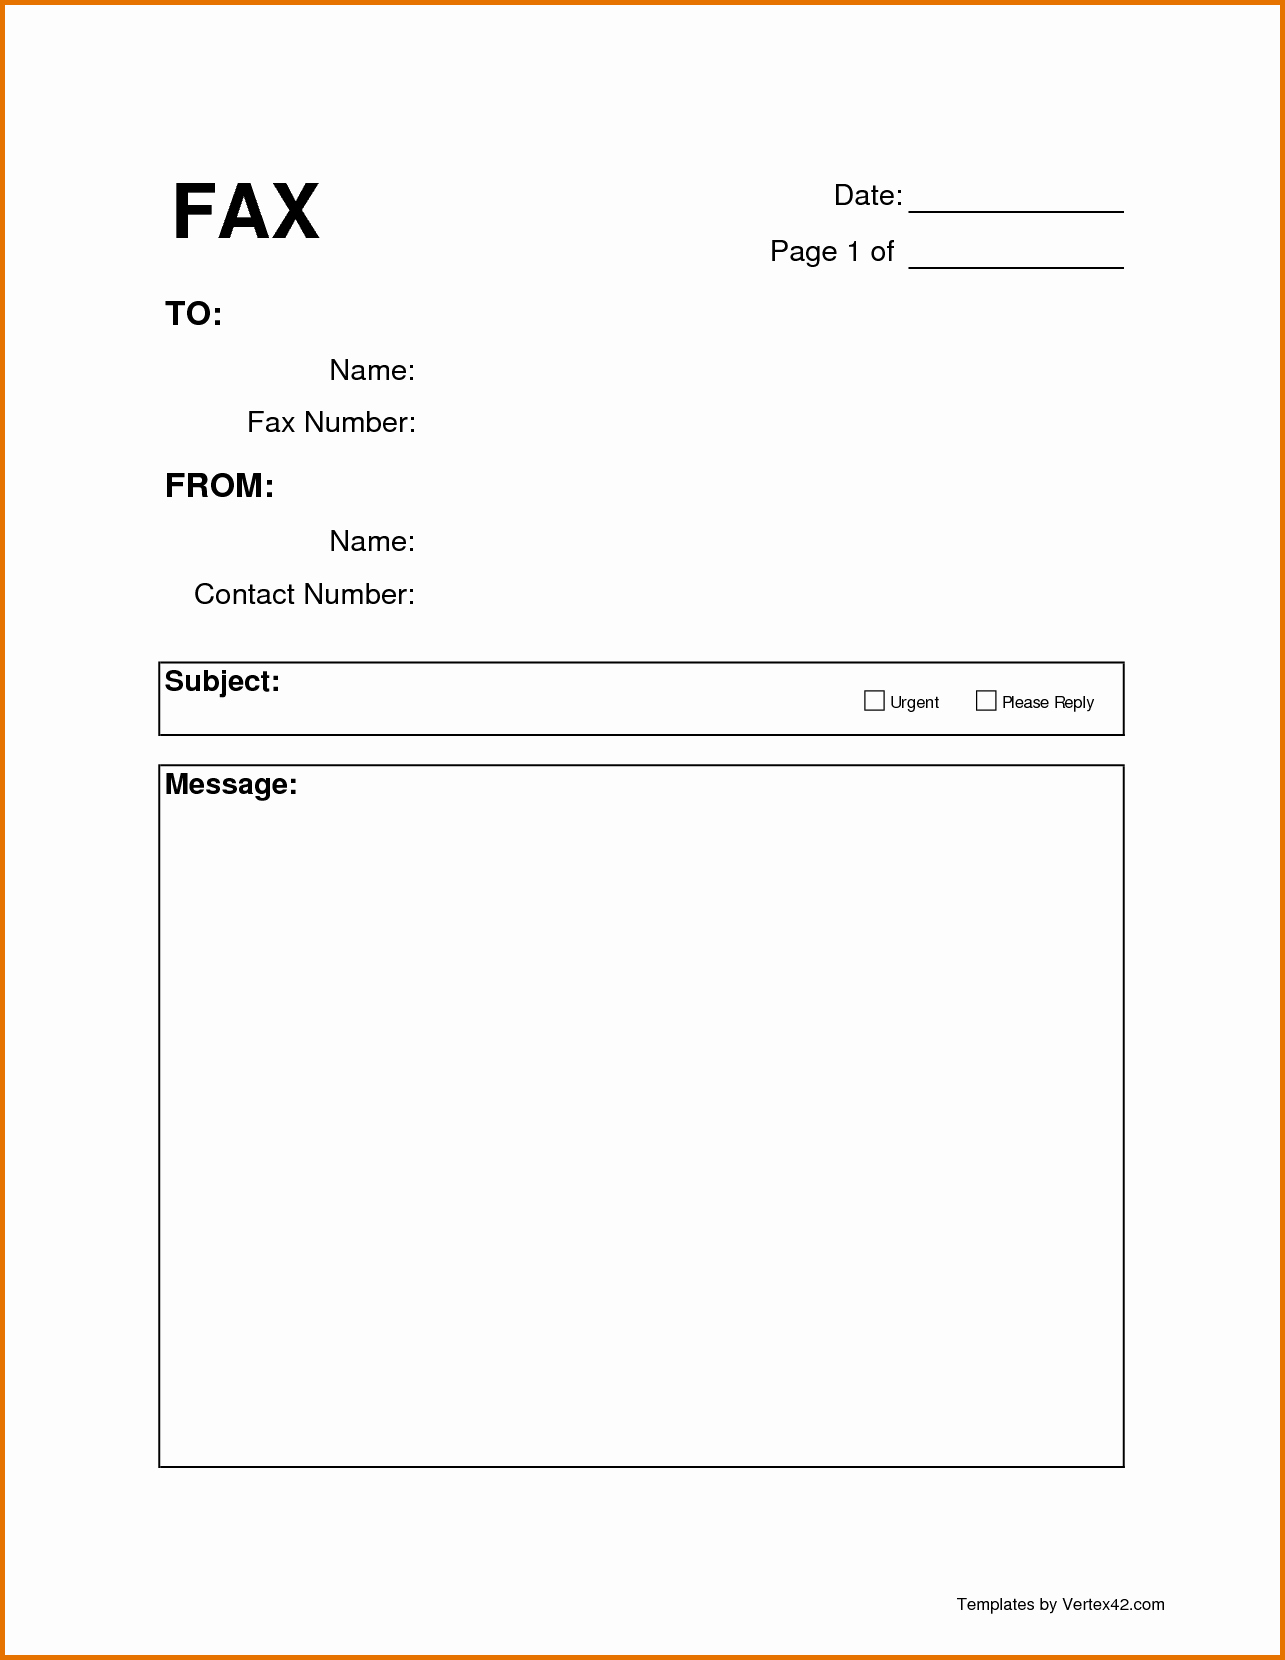 Cover Sheet for Fax Example Lovely 4 Printable Fax Cover Sheetsreference Letters Words